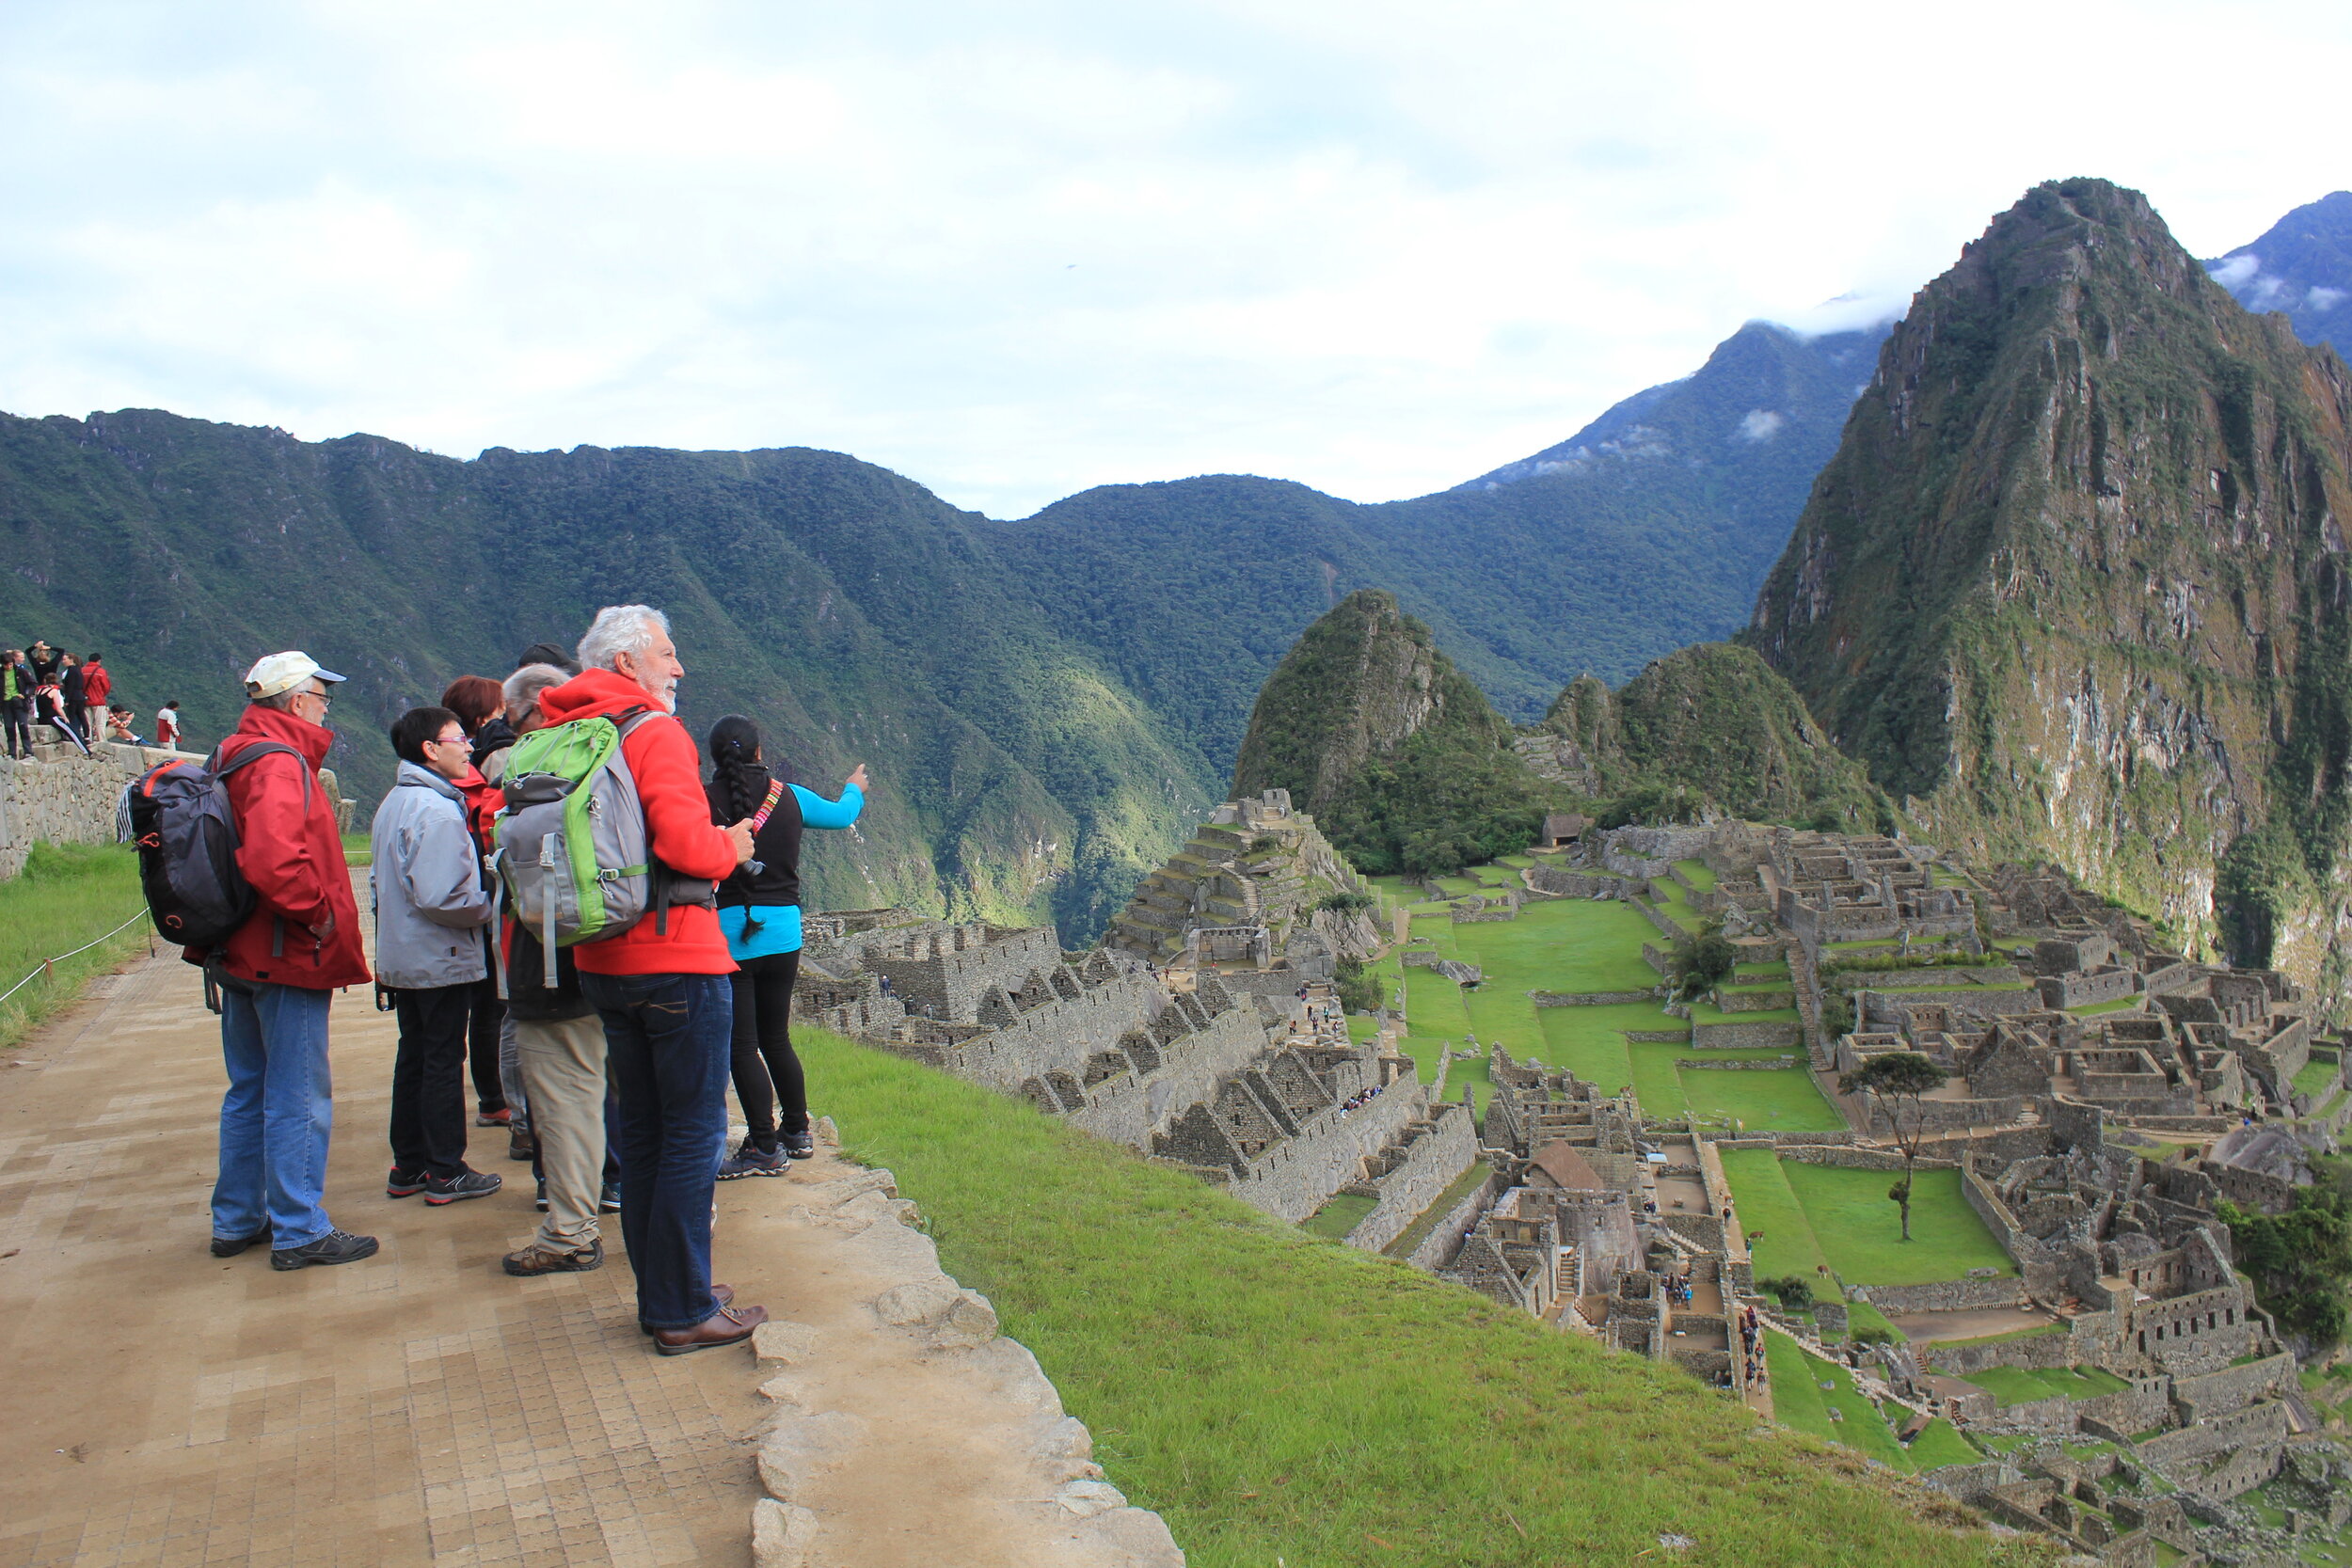 5 Brilliant Ways To Teach Your Audience About Incas Architecture